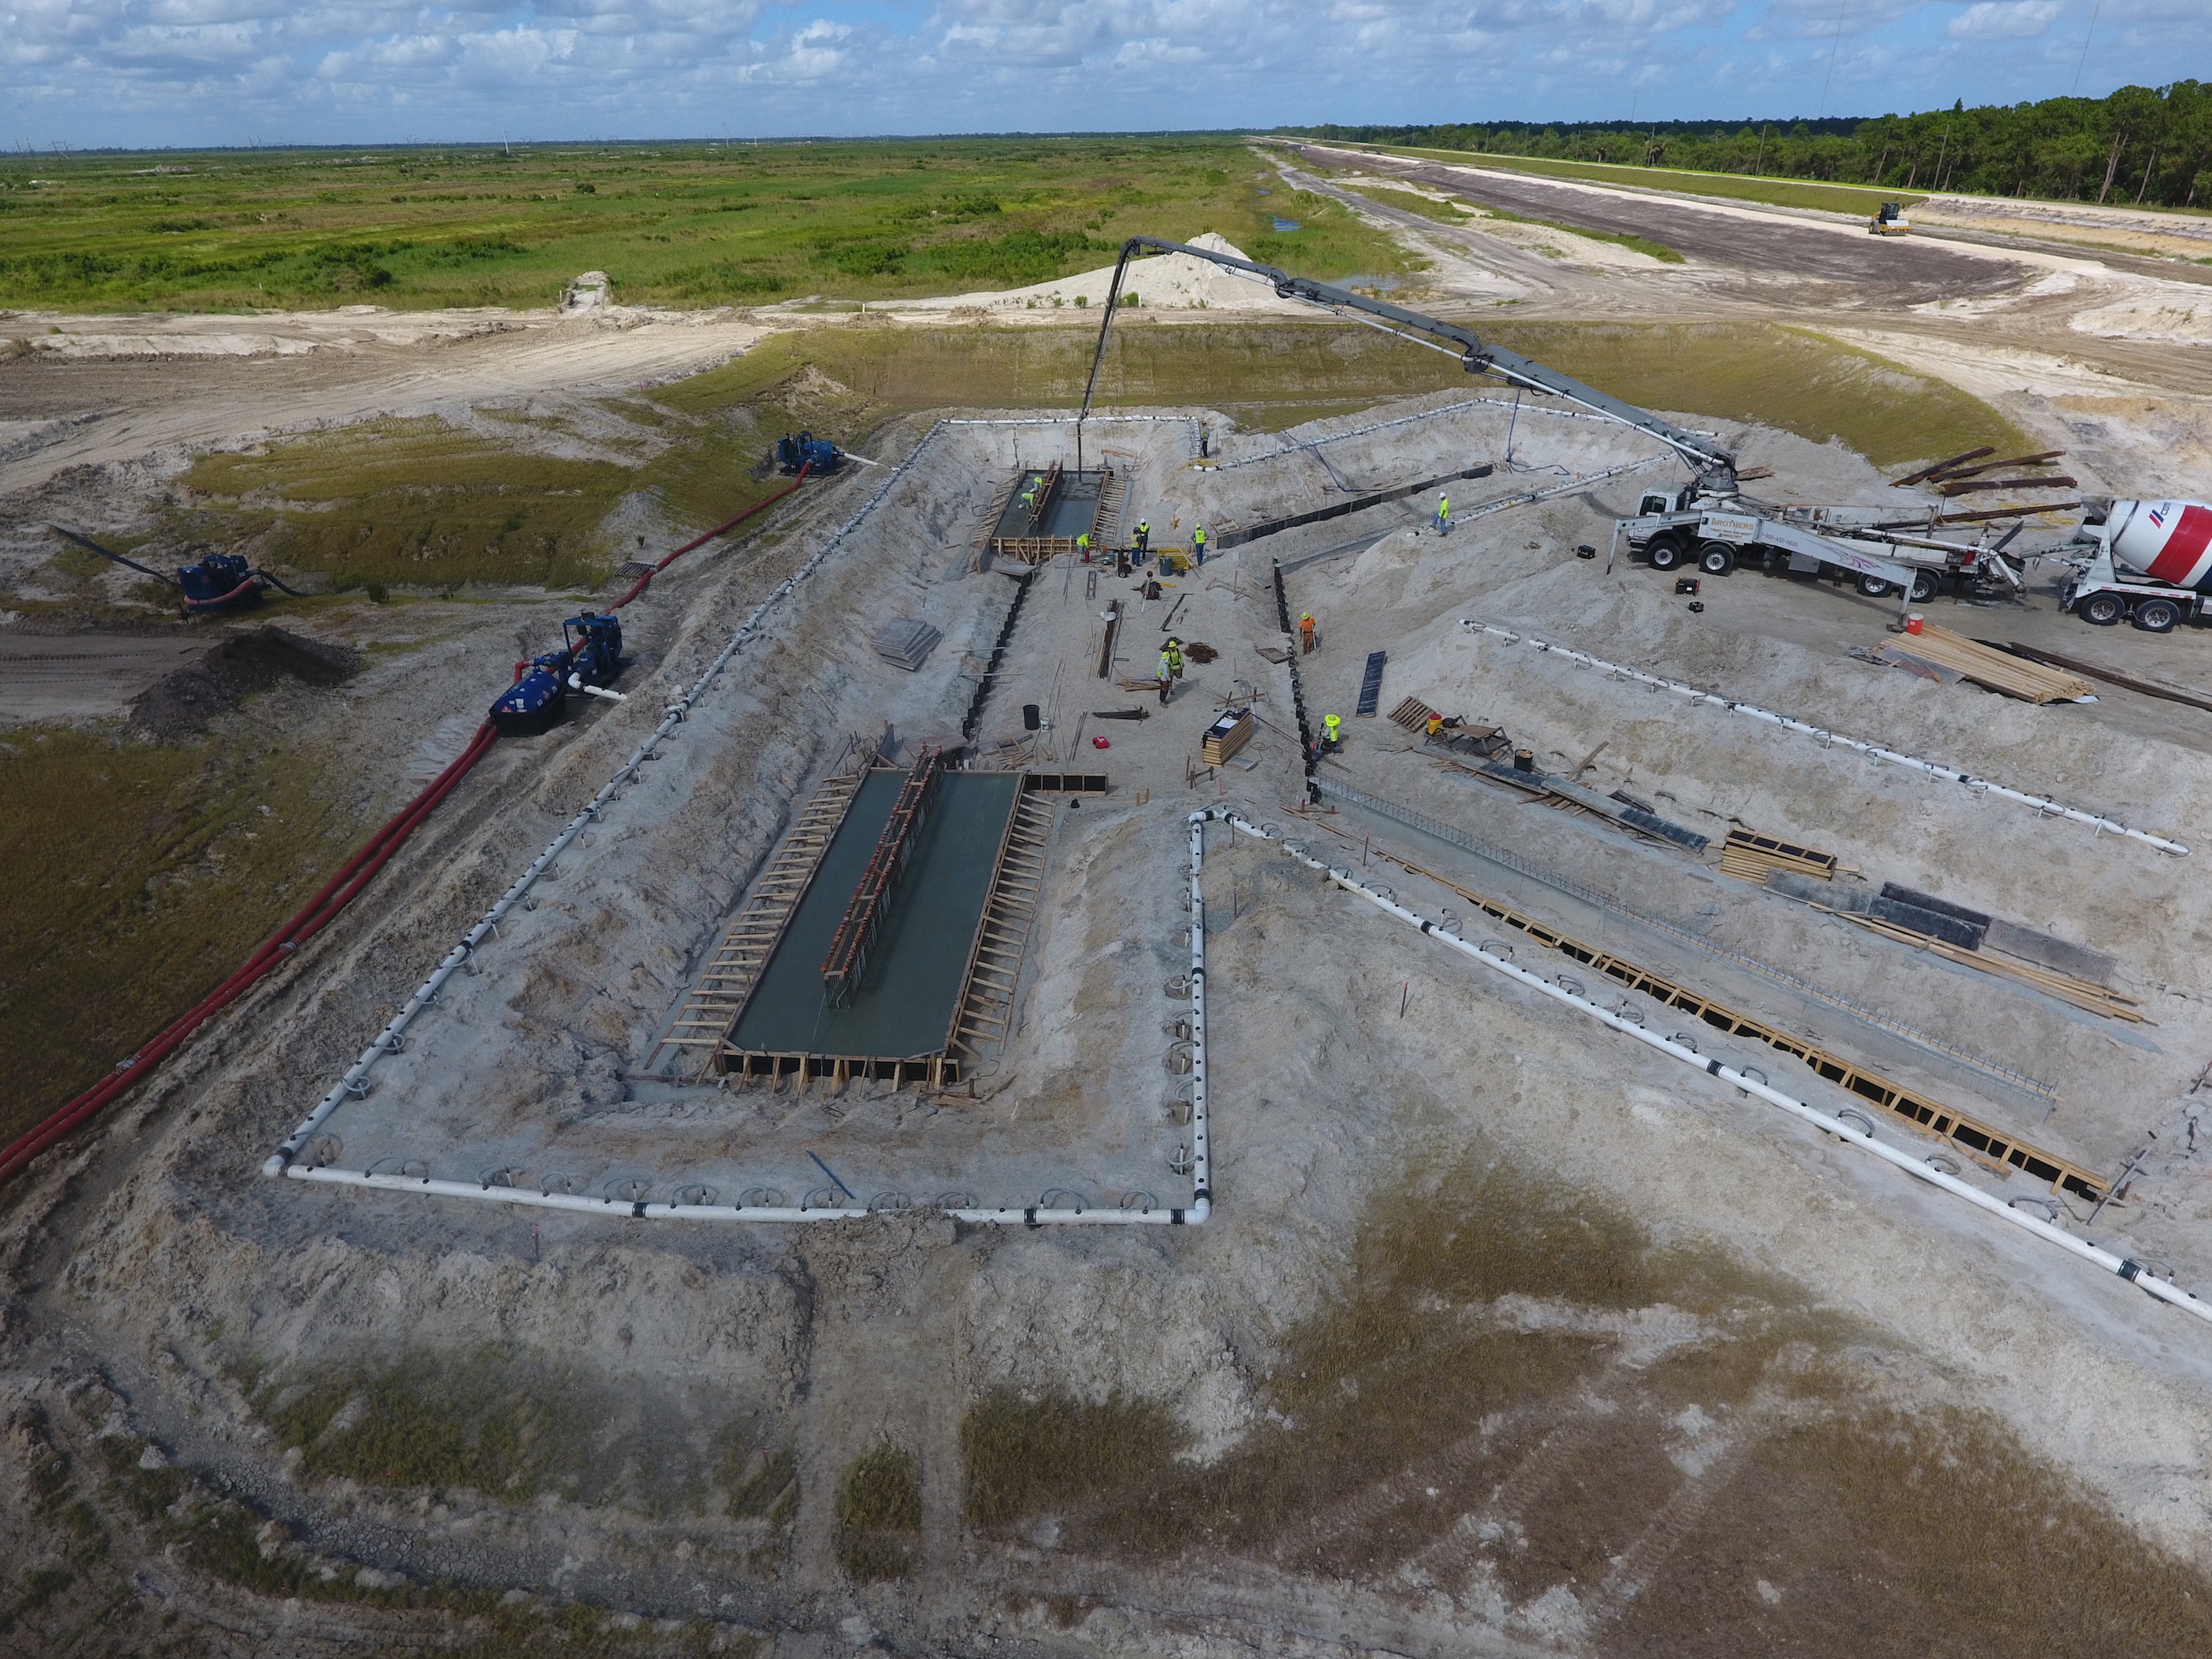 Flood control: Another view of a C-44 reservoir pump station in the Everglades that pumps water to a stormwater treatment area, helping to reduce the number of high flow events.